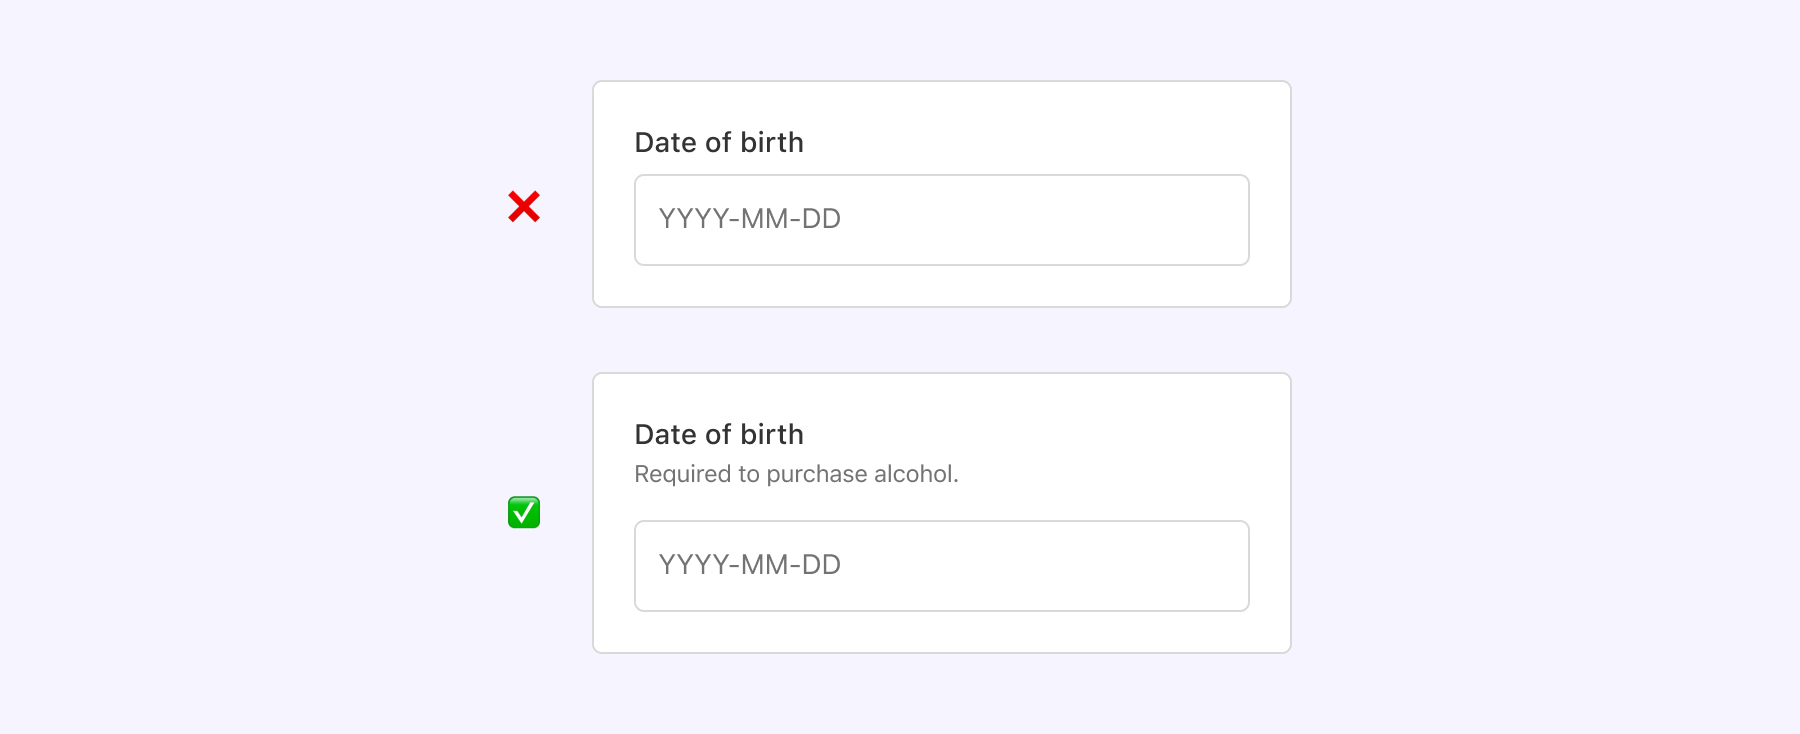 An example of what not to do, which shows a request for the customer date of birth. An example of what to do for this scenario, where the UI indicates that date of birth is required to purchase alcohol